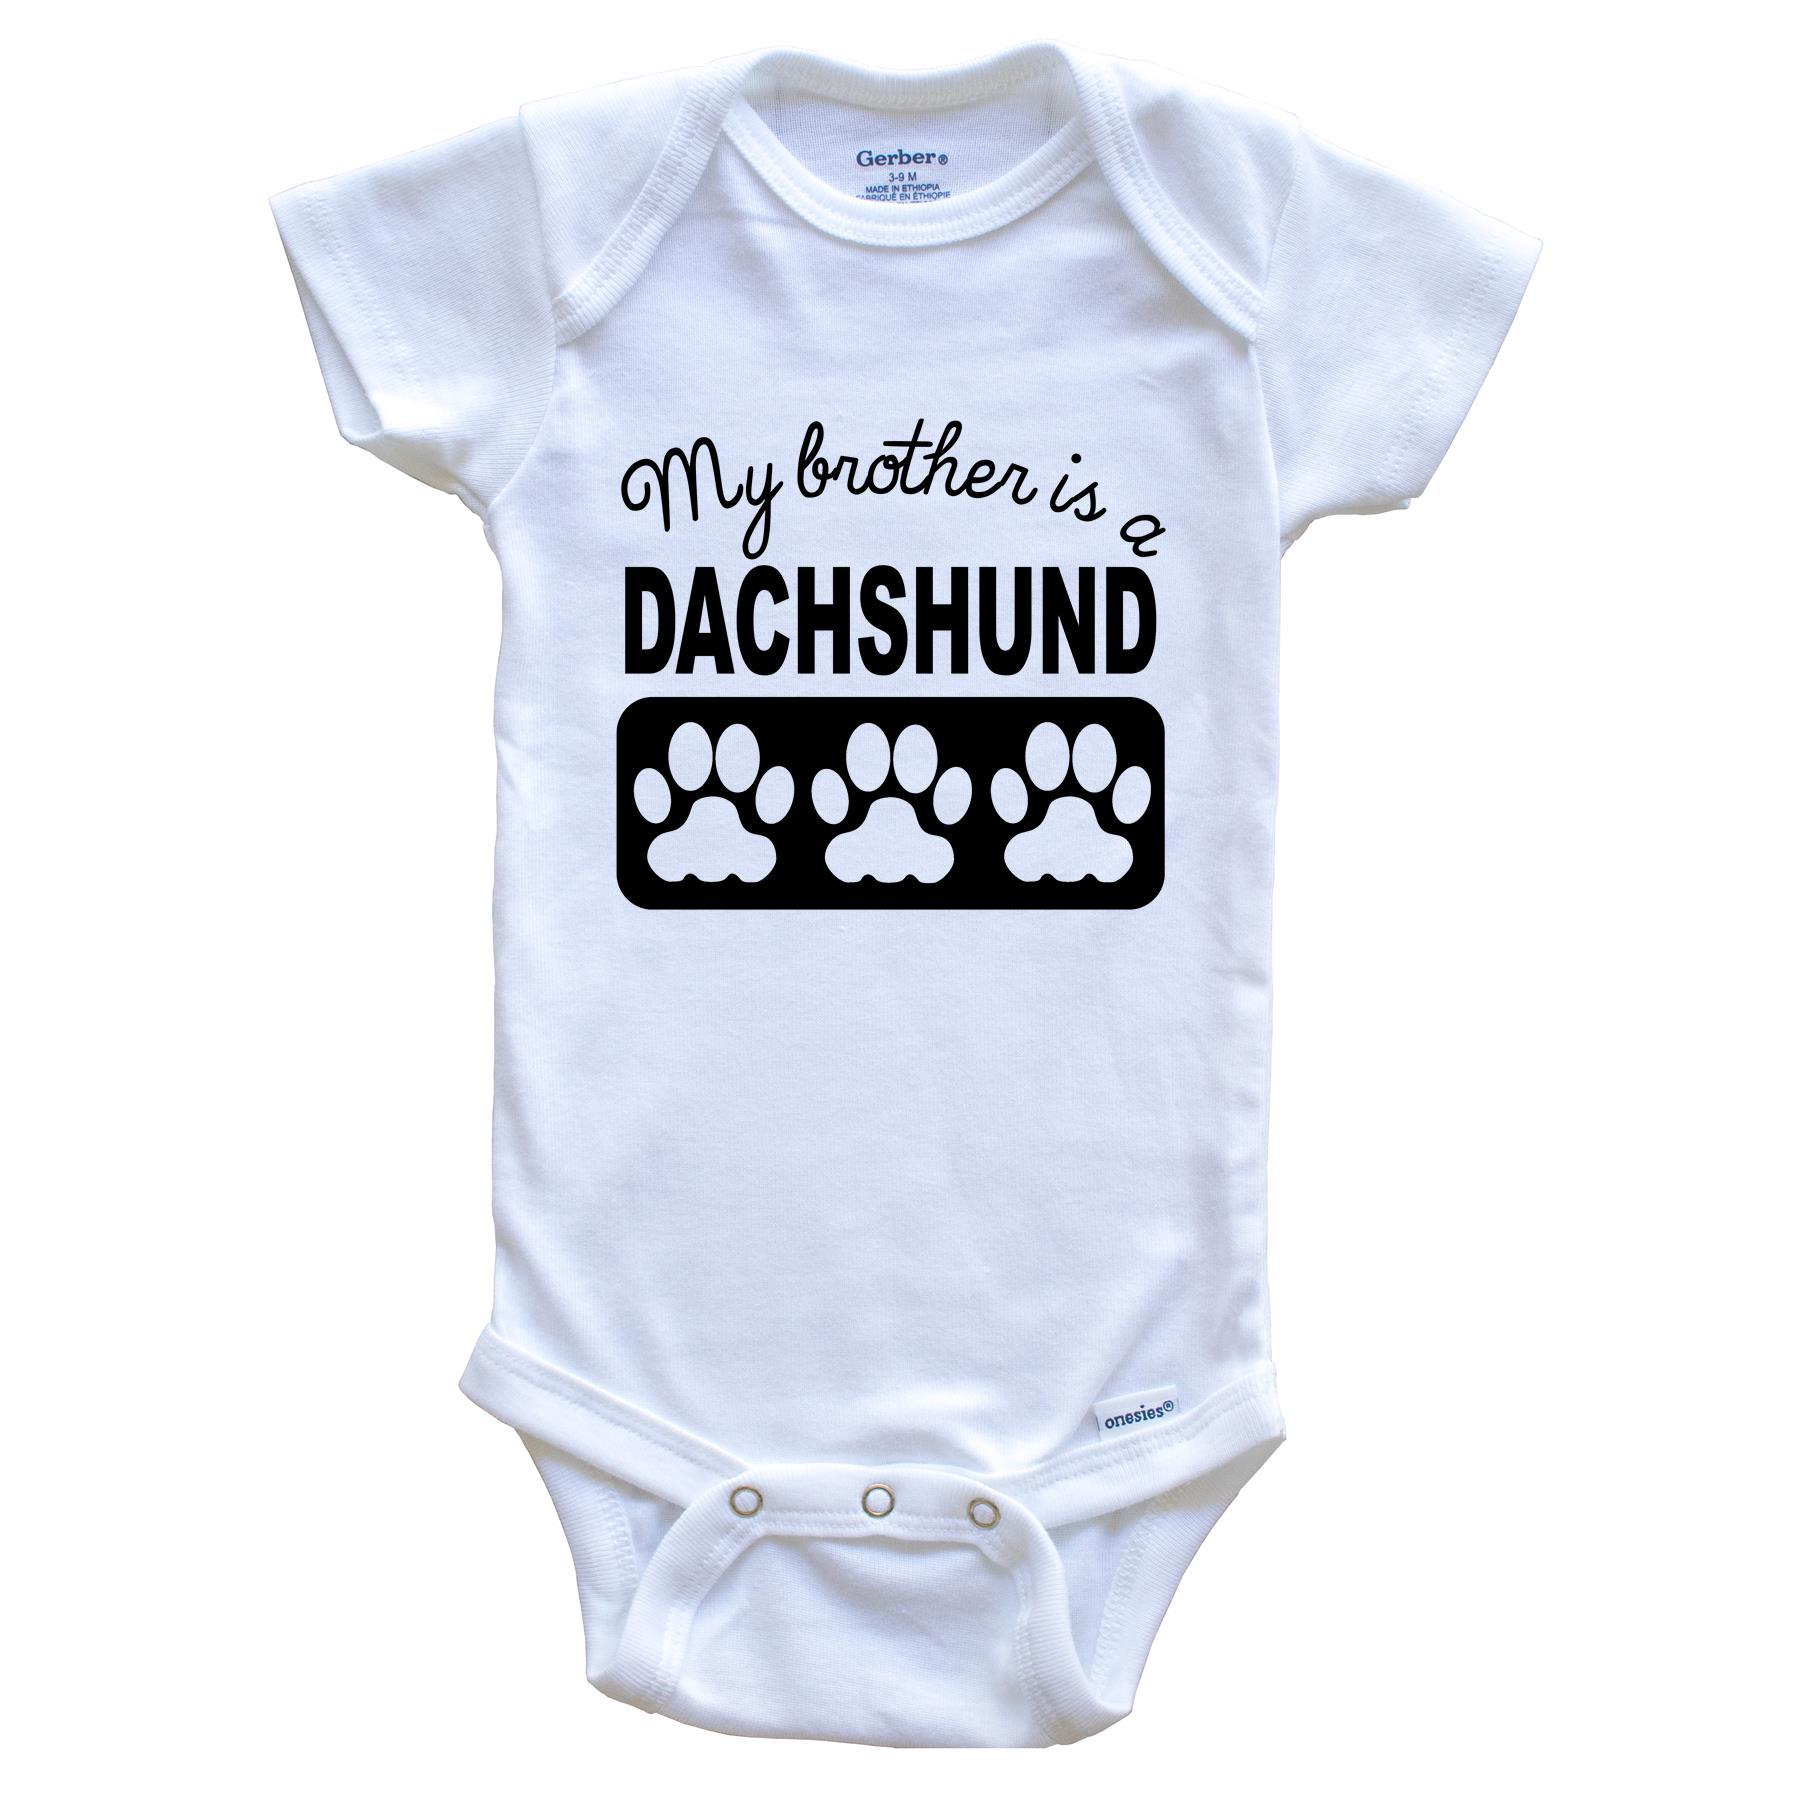 My Brother Is A Dachshund Baby Onesie